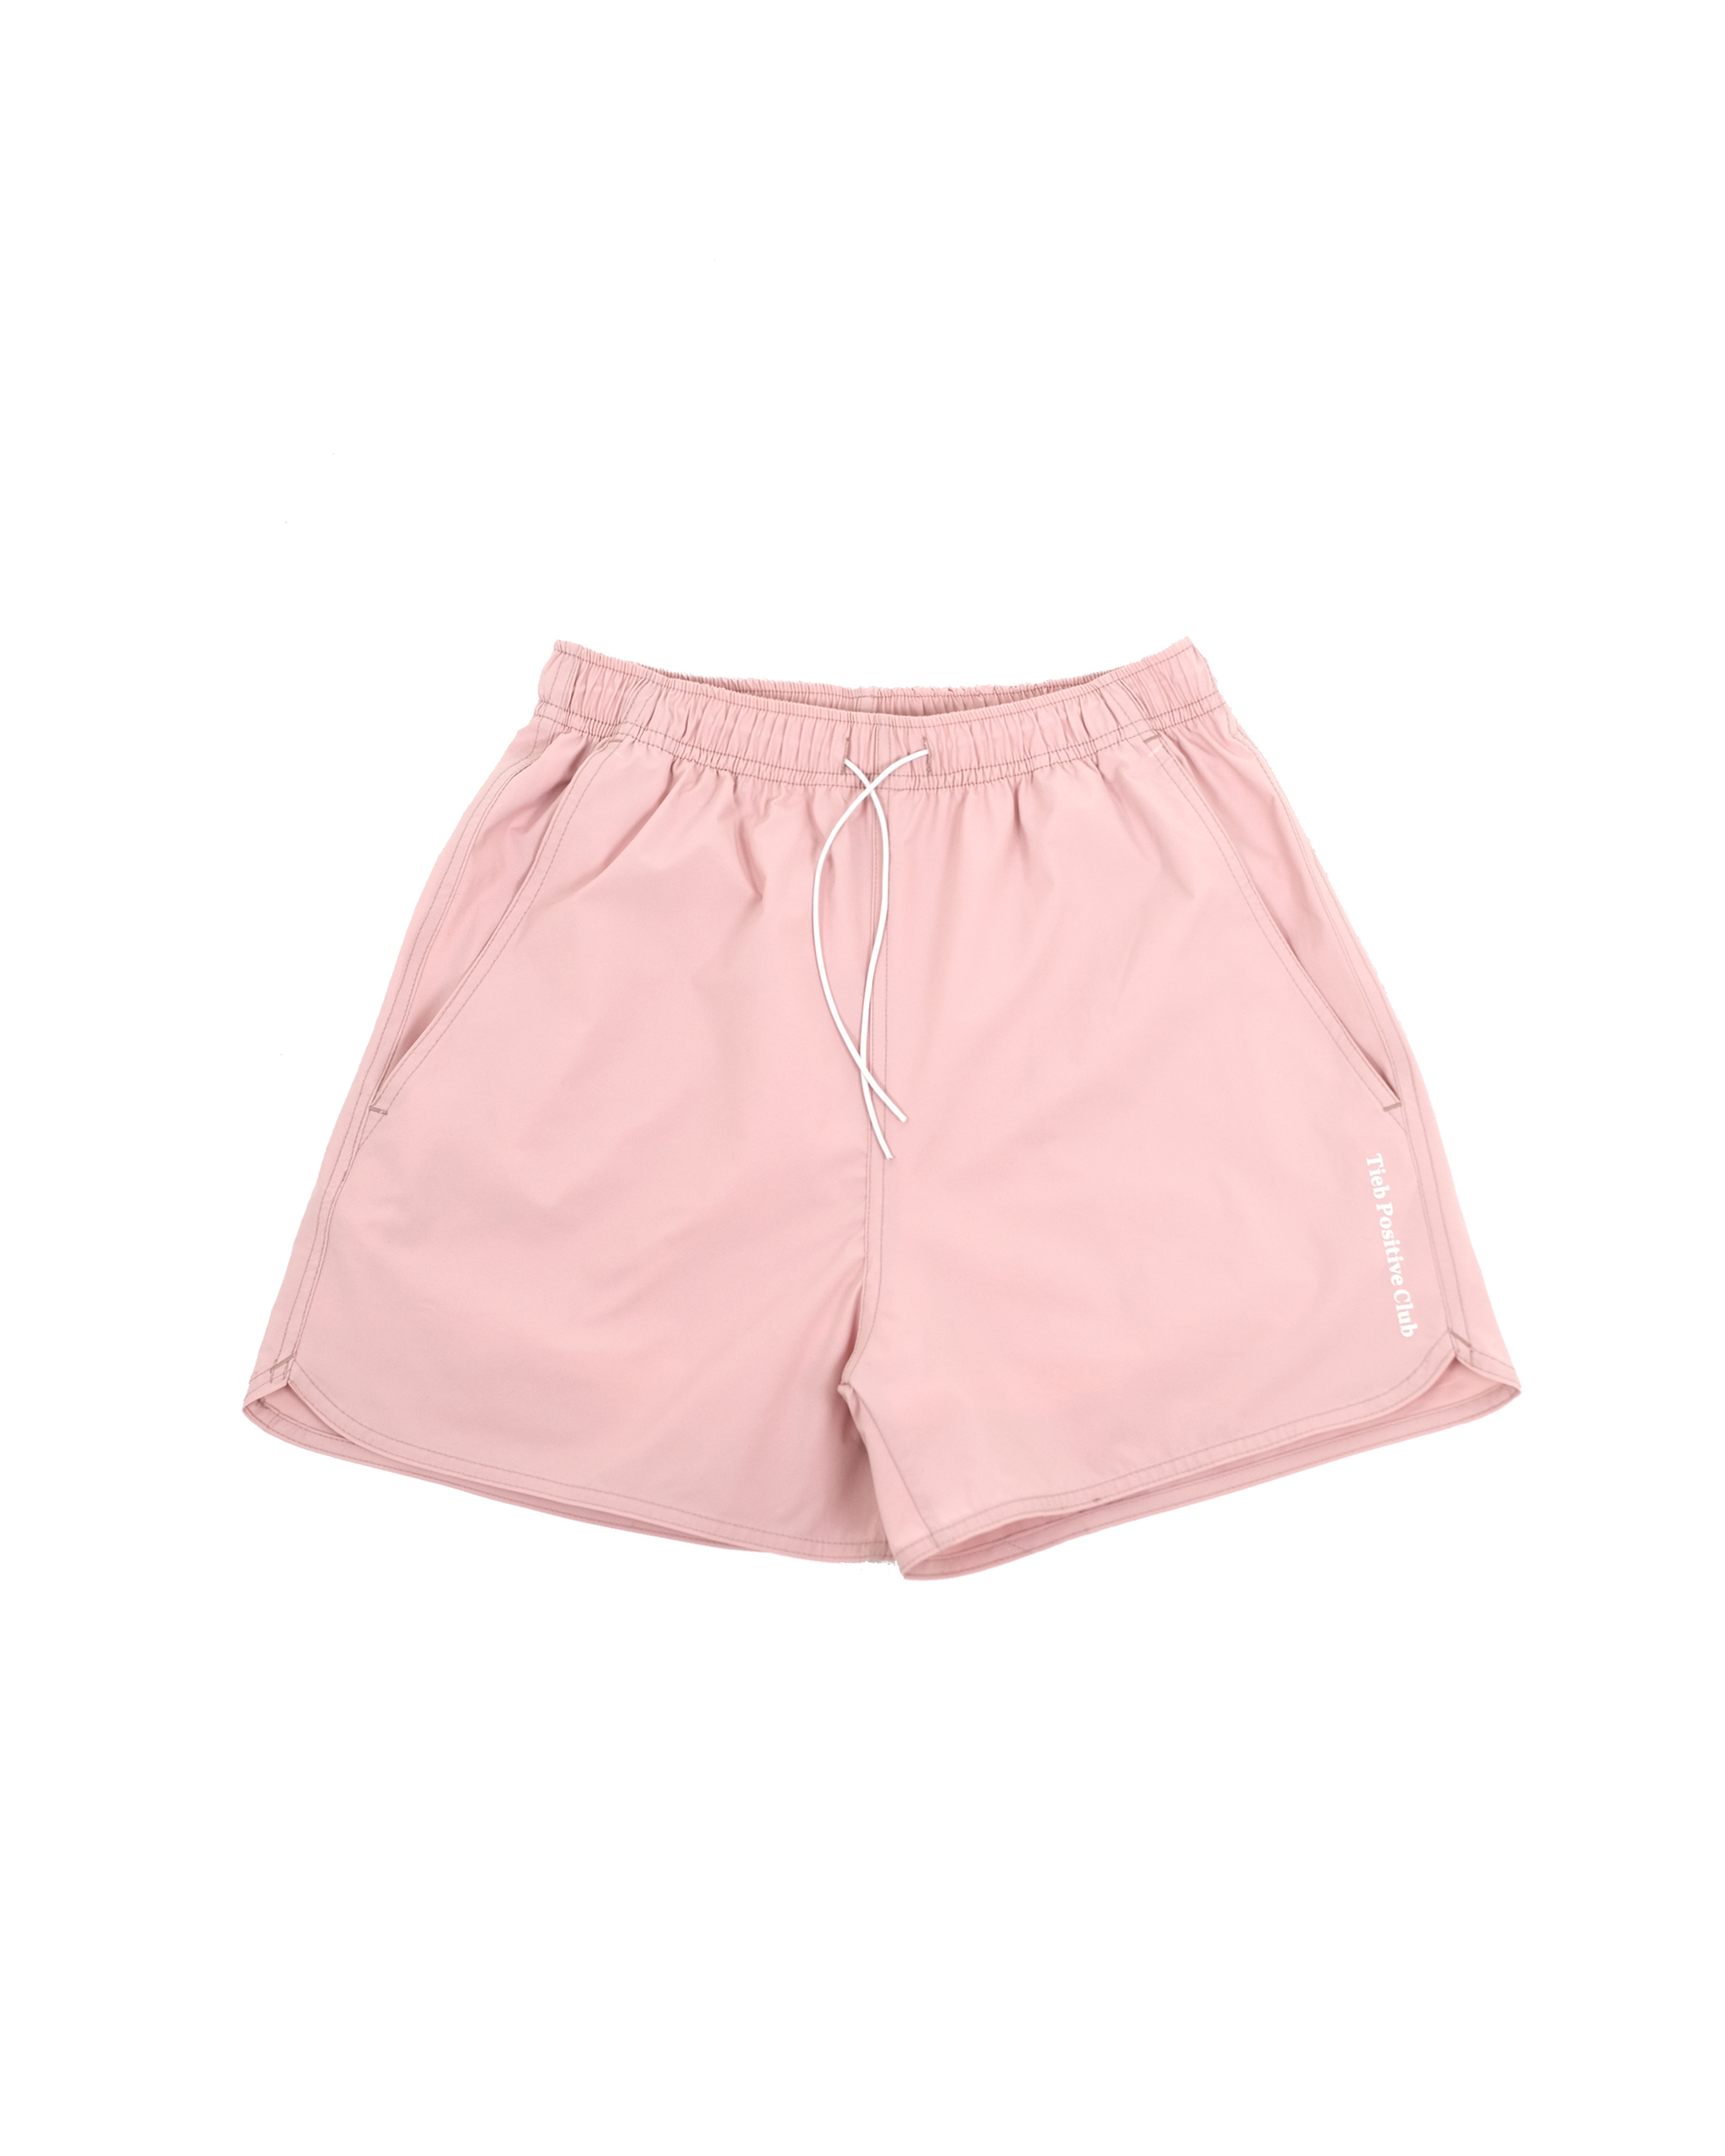 FREEDOM WIND SHORTS / Pink